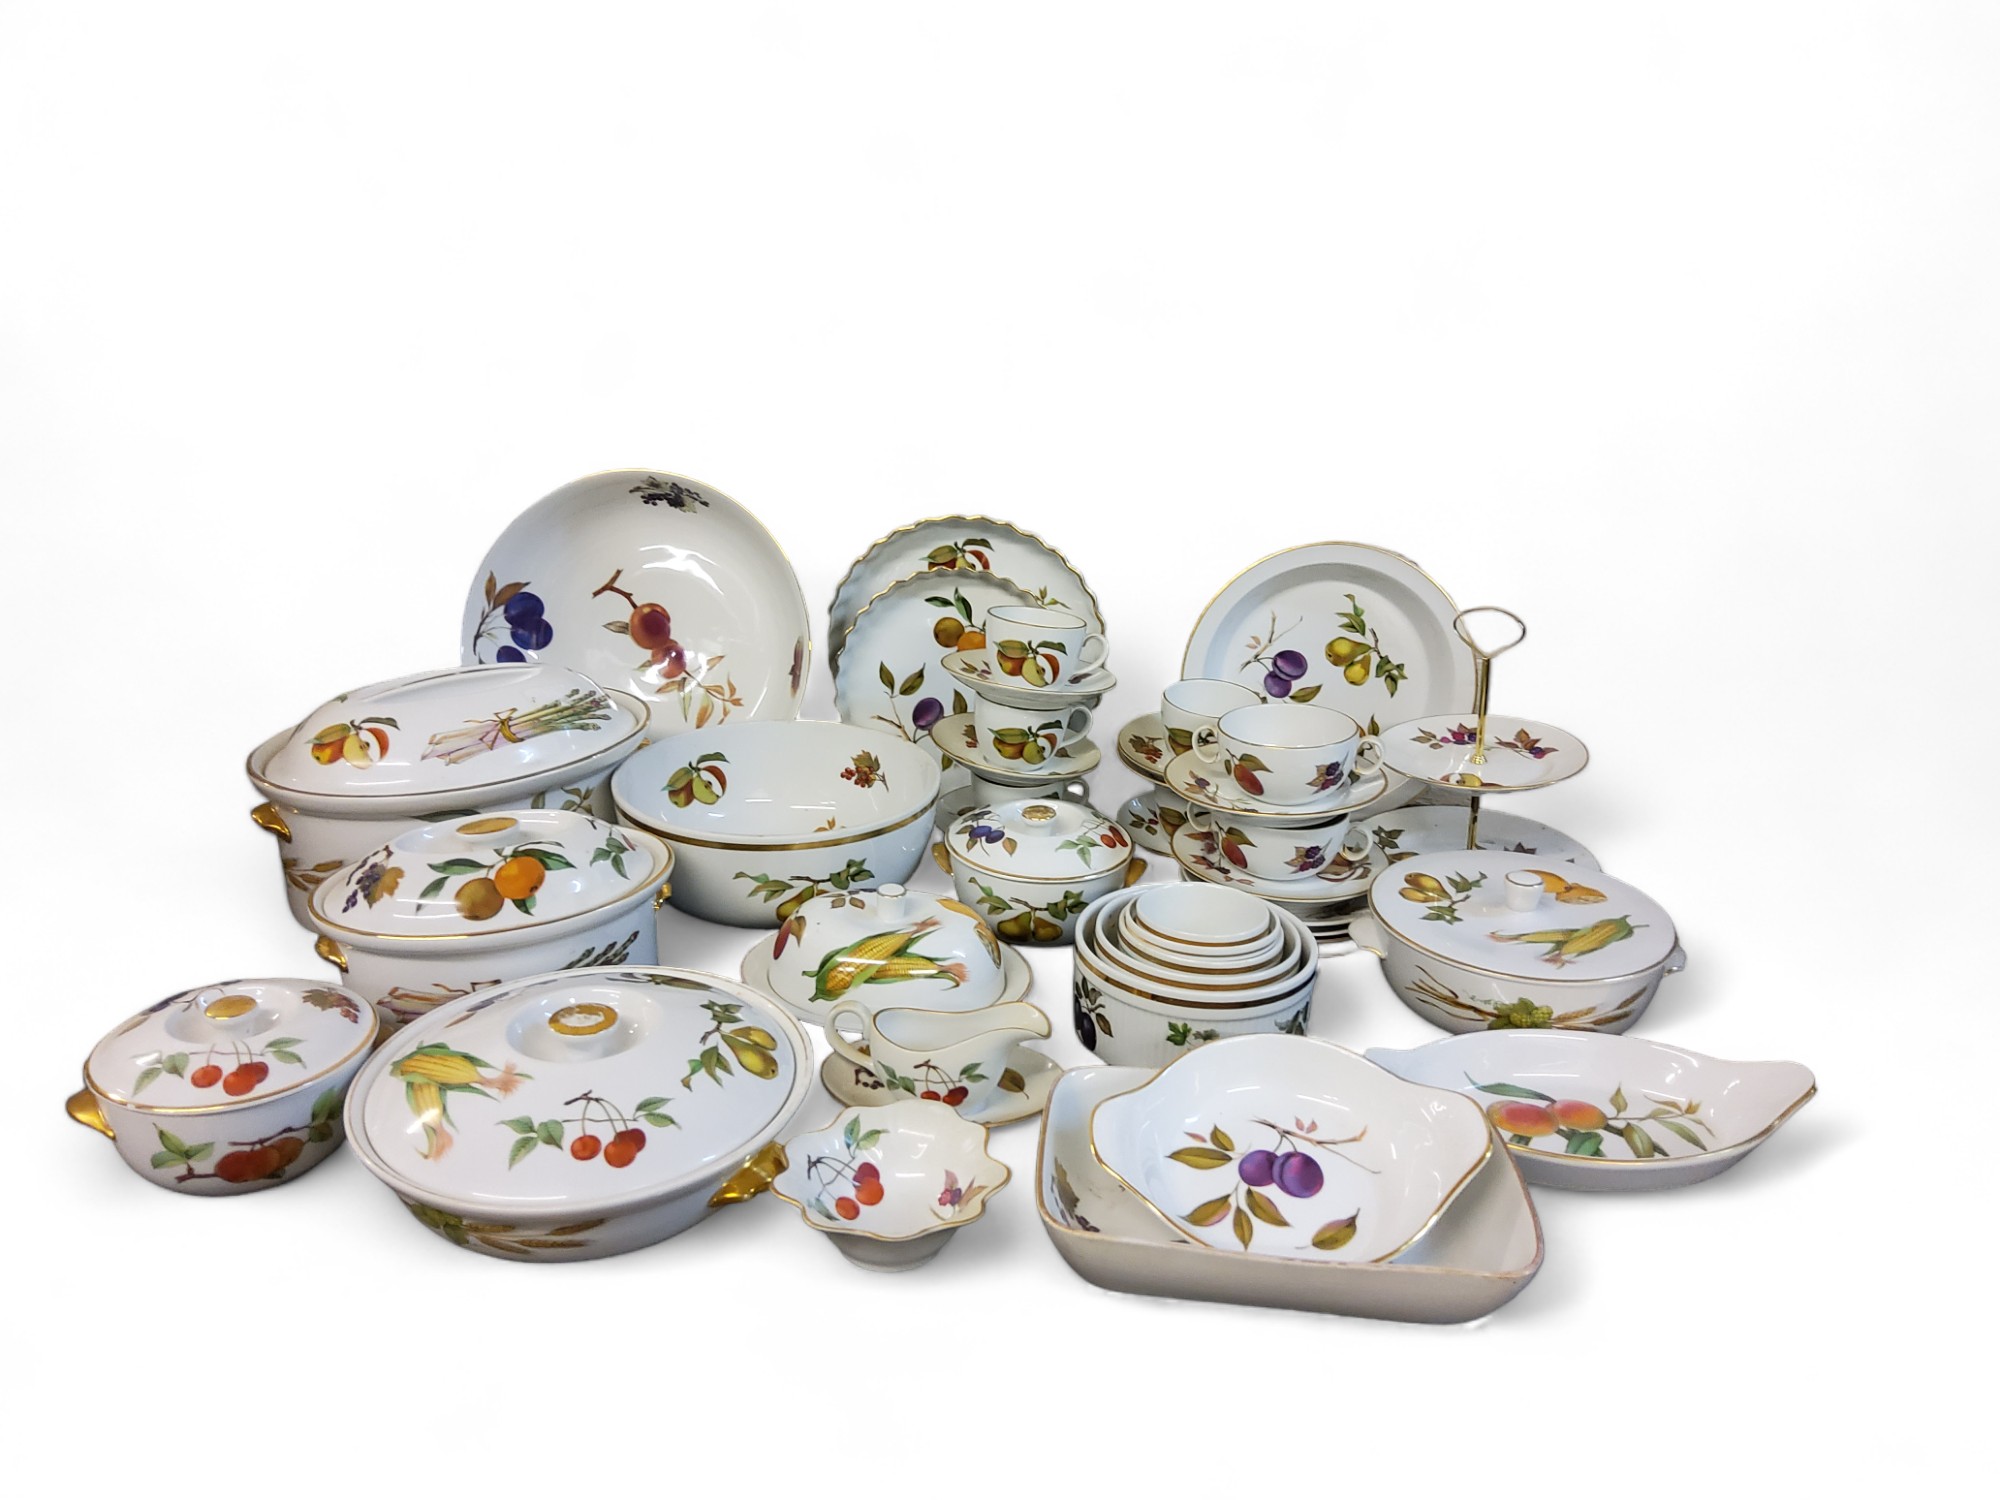 Royal Worcester Oven Table Ware Evesham pattern - flam dishes, cups, saucers, tureens, dishes,